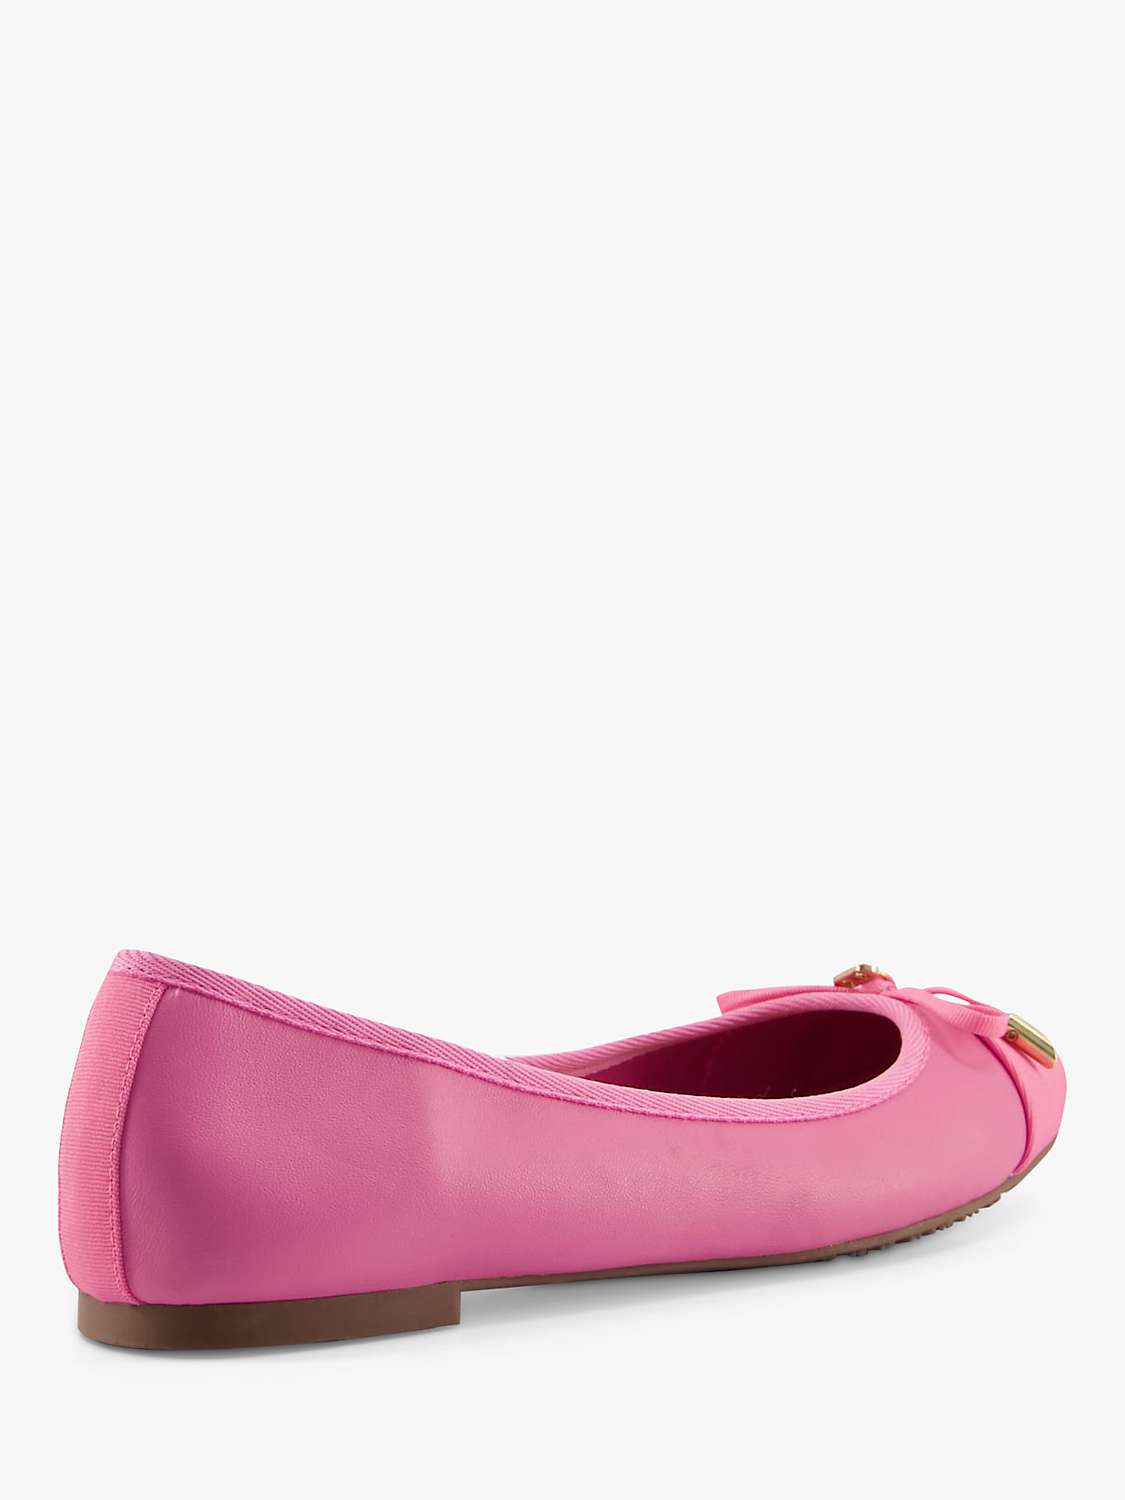 Dune Hartlyn Leather Pumps, Pink at John Lewis & Partners